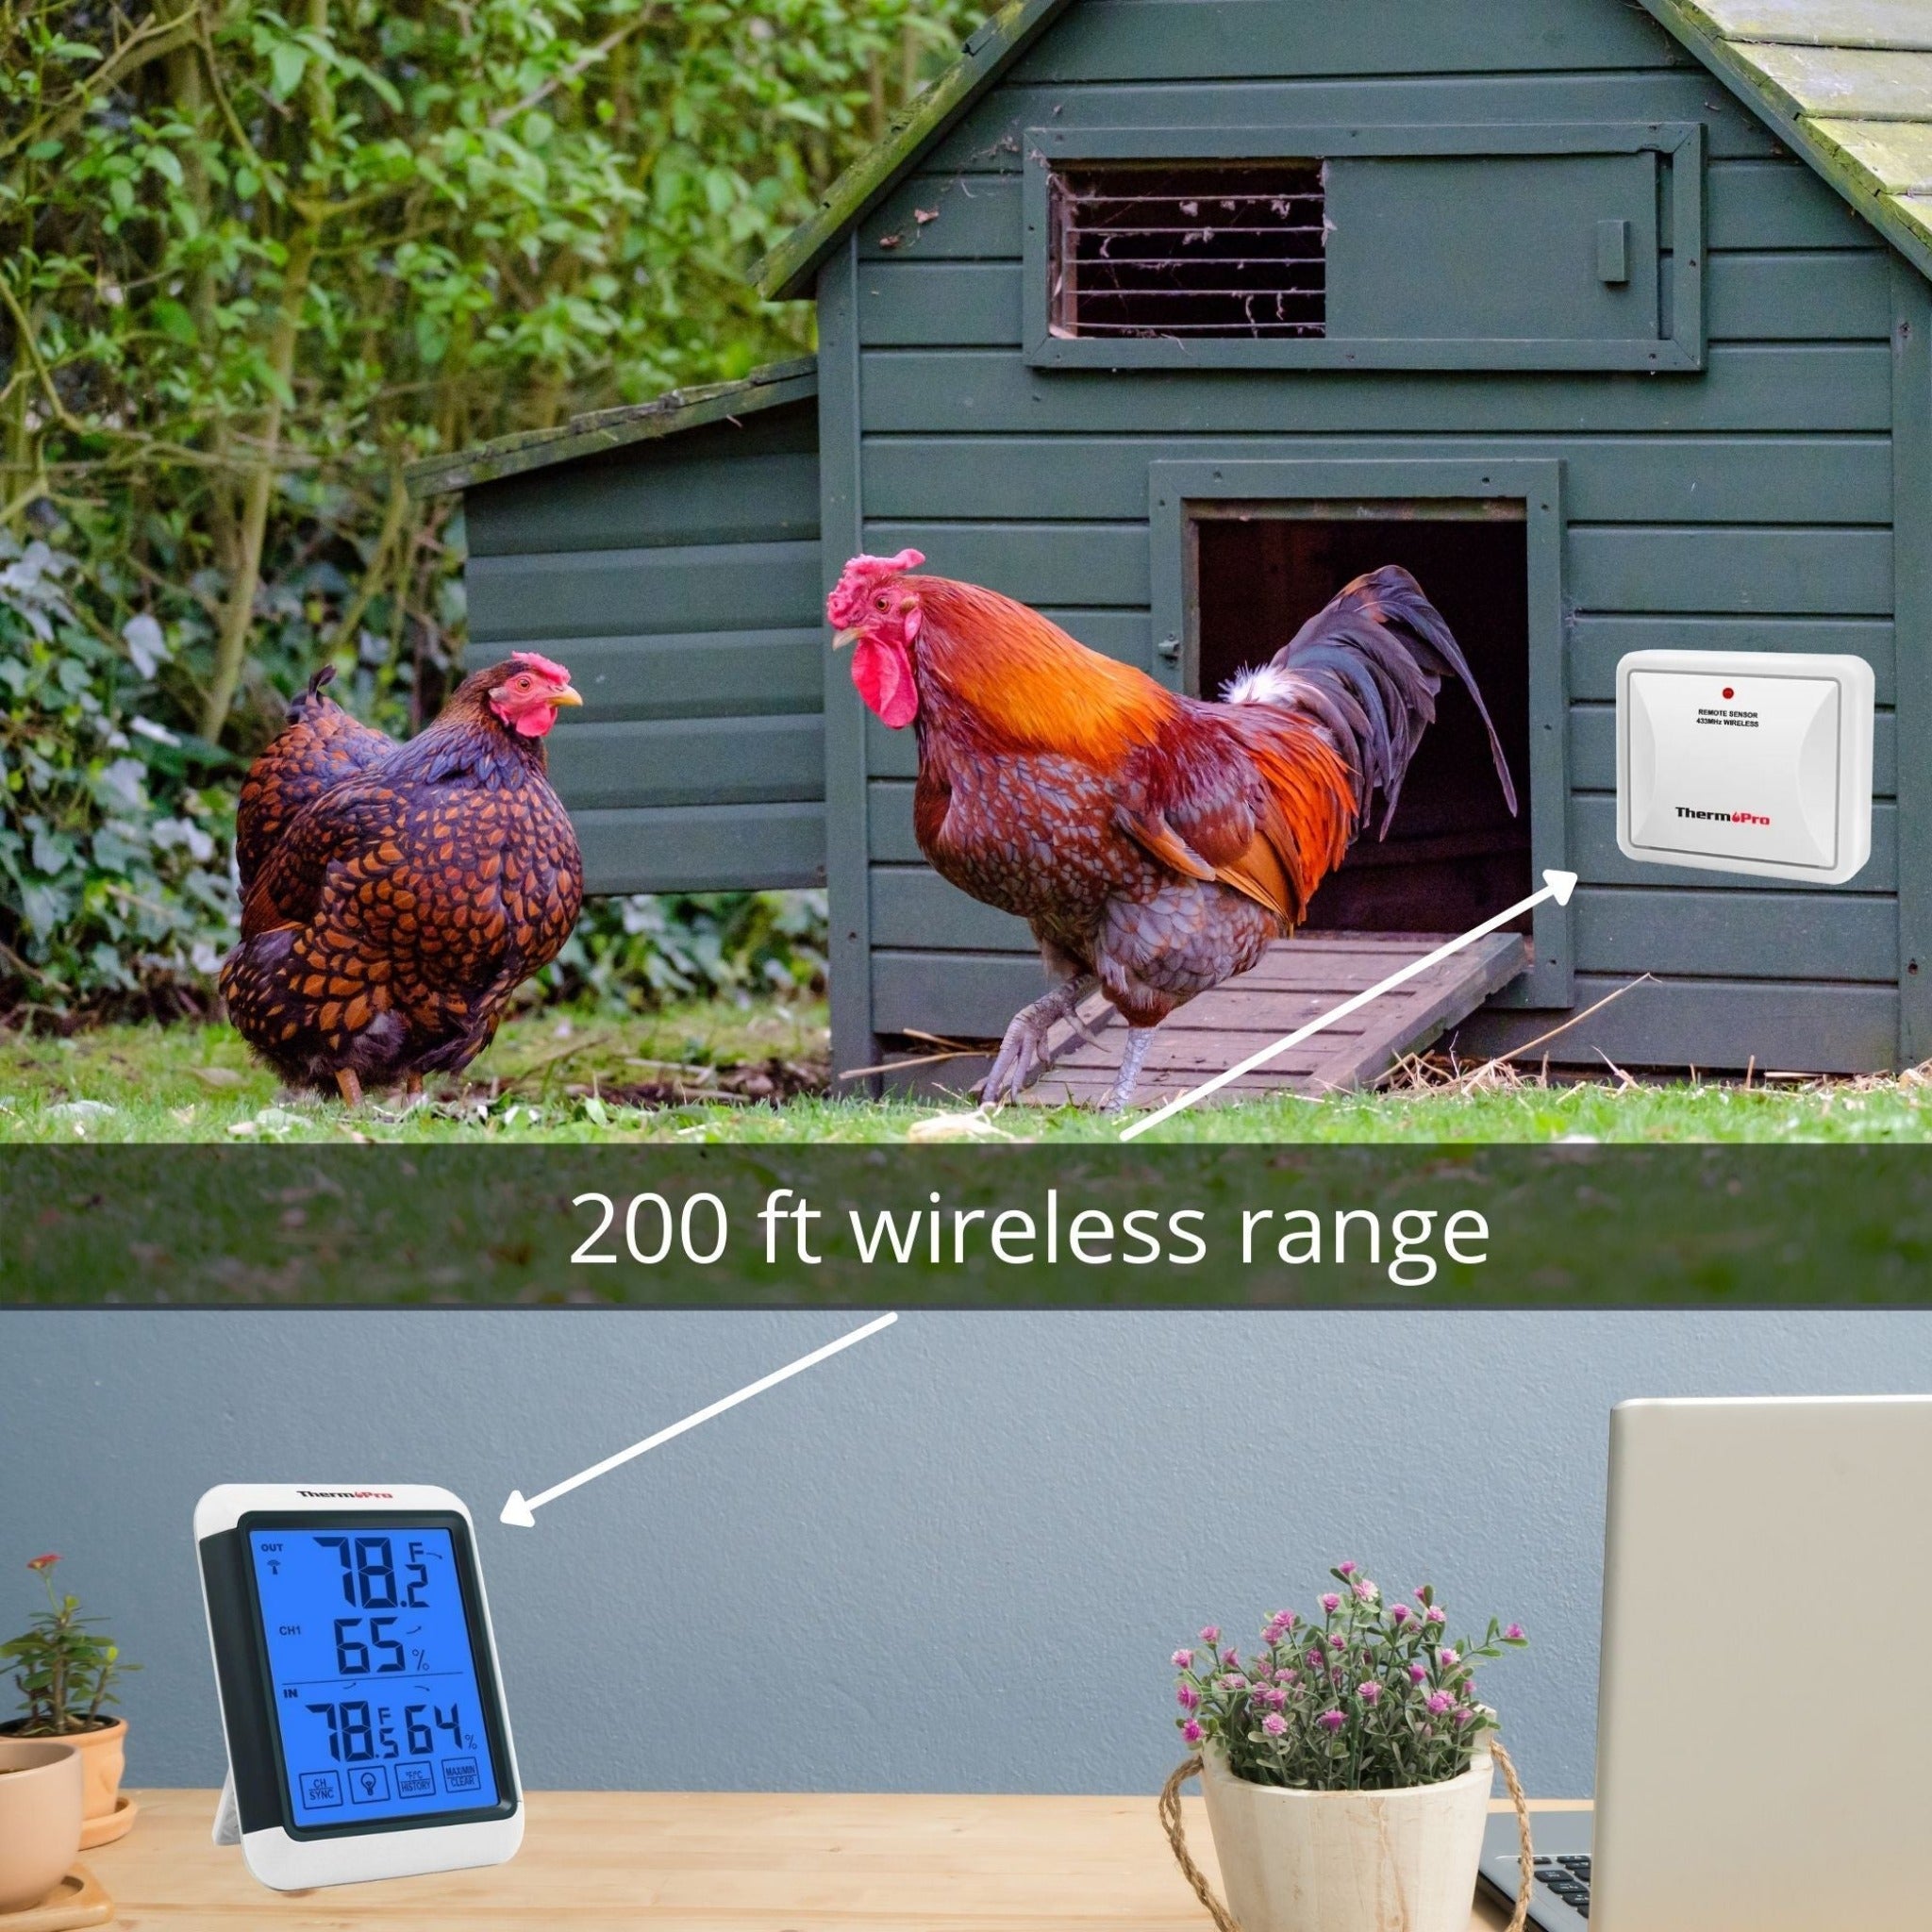 Hatching Time. Image shows sensor as it would be mounted outside of chicken coop. 2 chickens are by the outside of the coop. Image states digital sensor and display have 200ft wireless range.